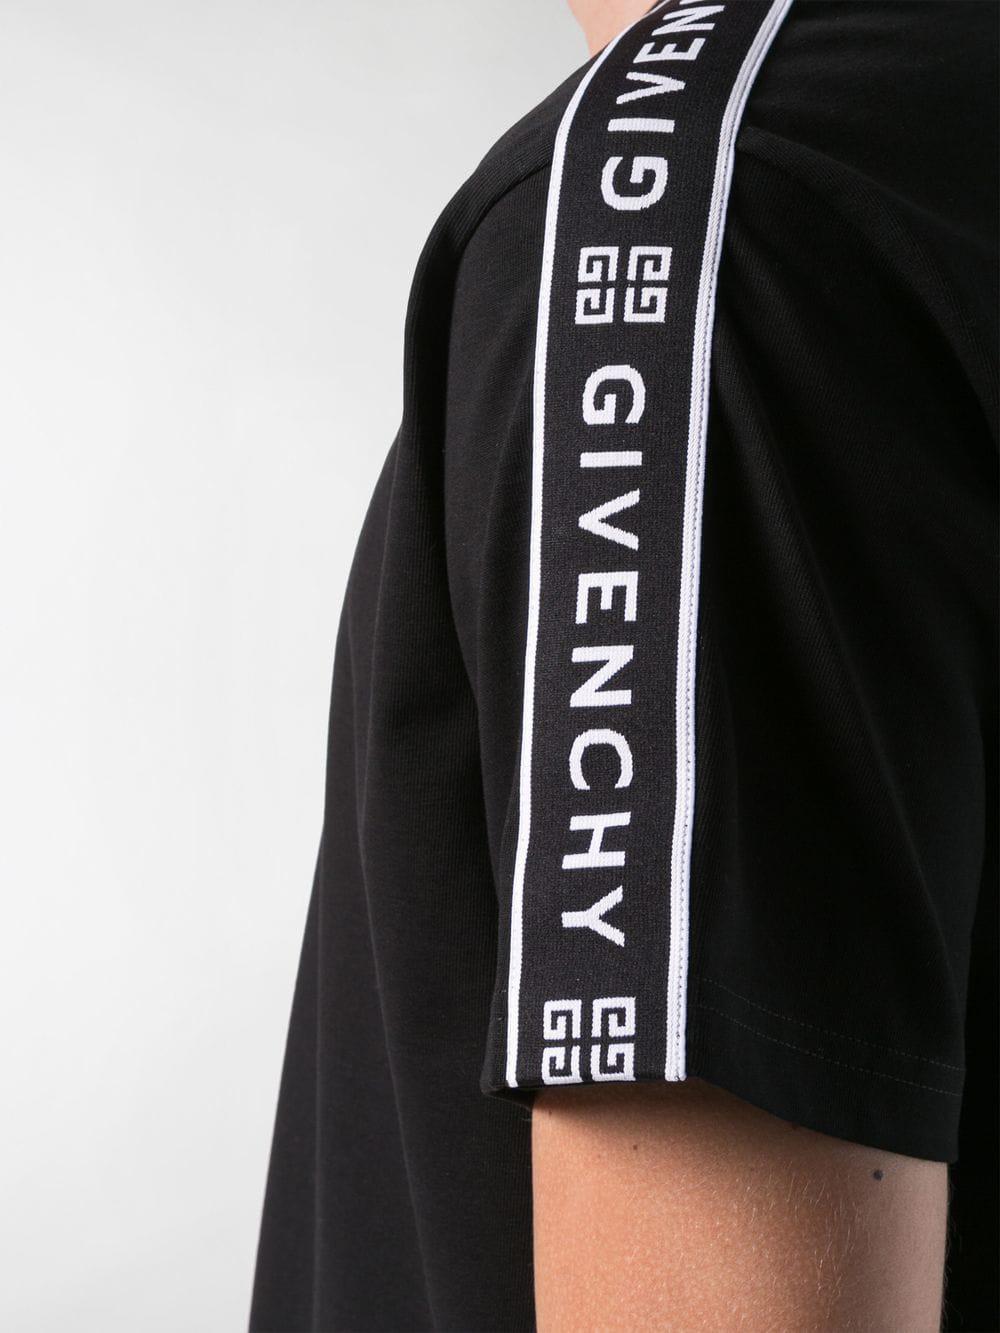 Givenchy Cotton 4g Webbing T-shirt in Black for Men - Lyst